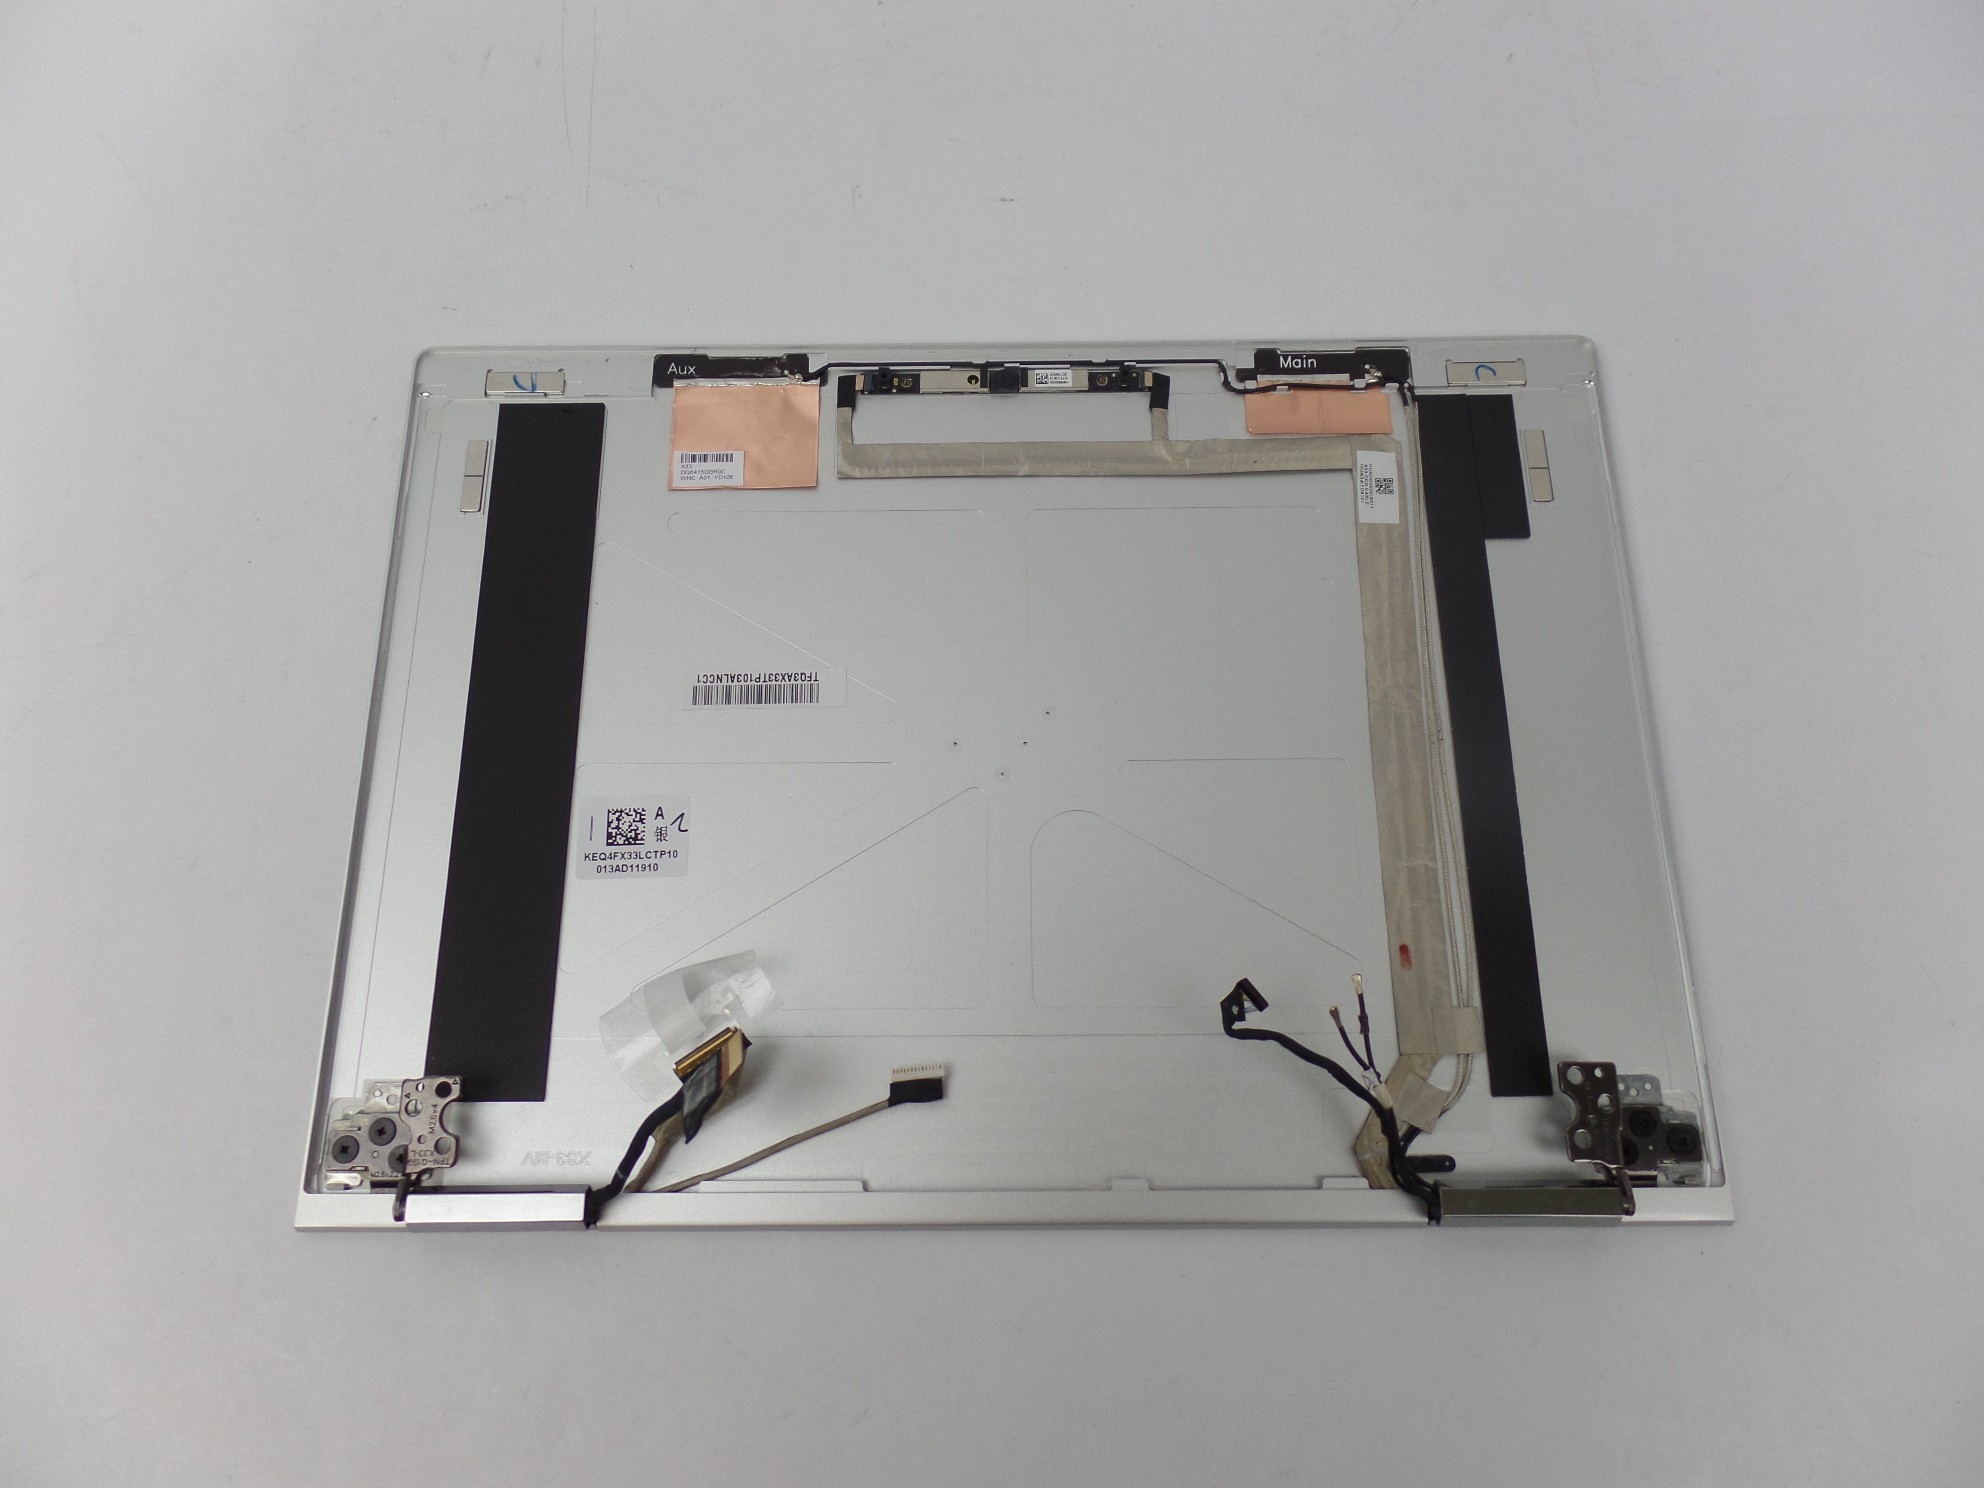 OEM LCD Top Cover Enclosure + Hinges + Web Camera for HP Spectre x360 13-AE011DX